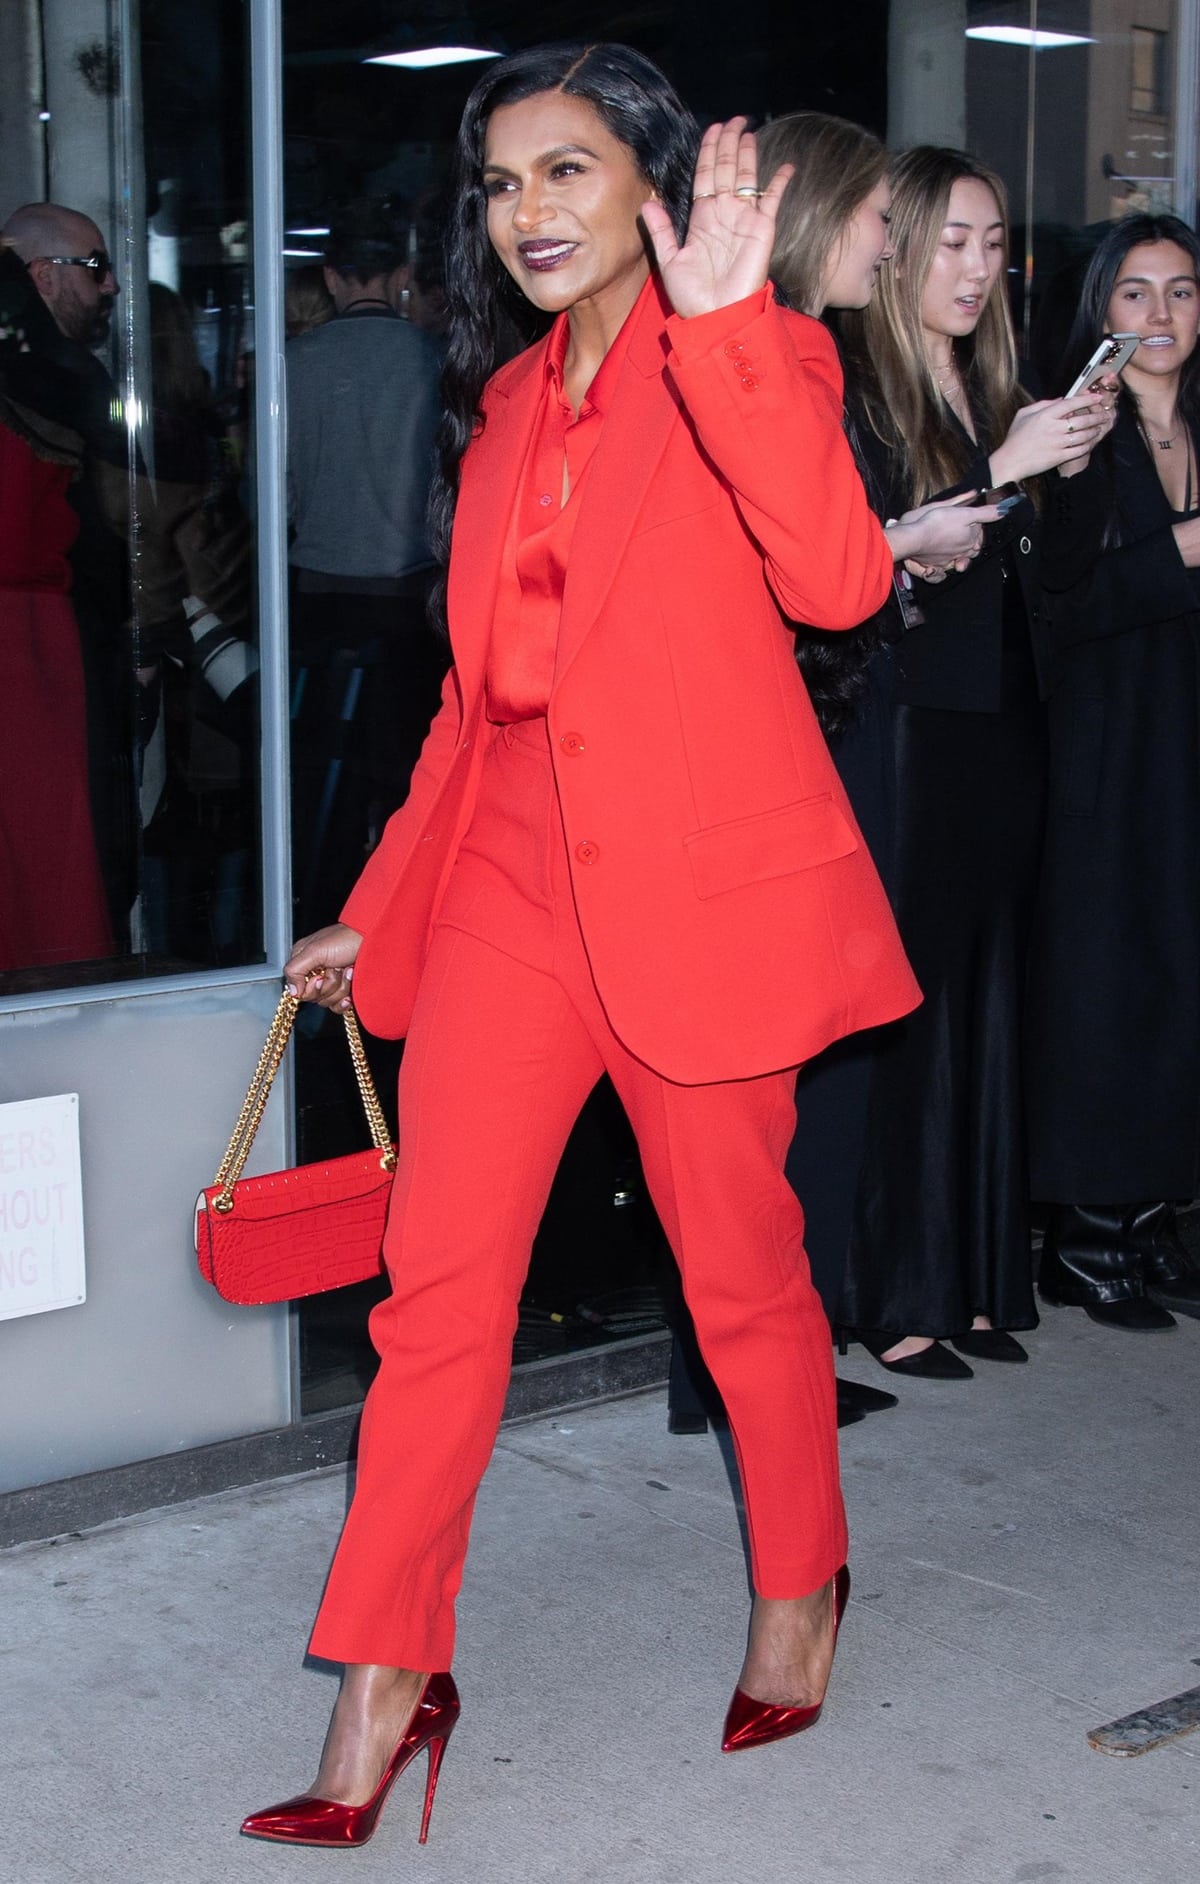 Mindy Kaling's look included a red tailored blazer layered over a satin button-down shirt tucked into matching crimson trousers, all tailored to perfection for a professional, business-forward vibe